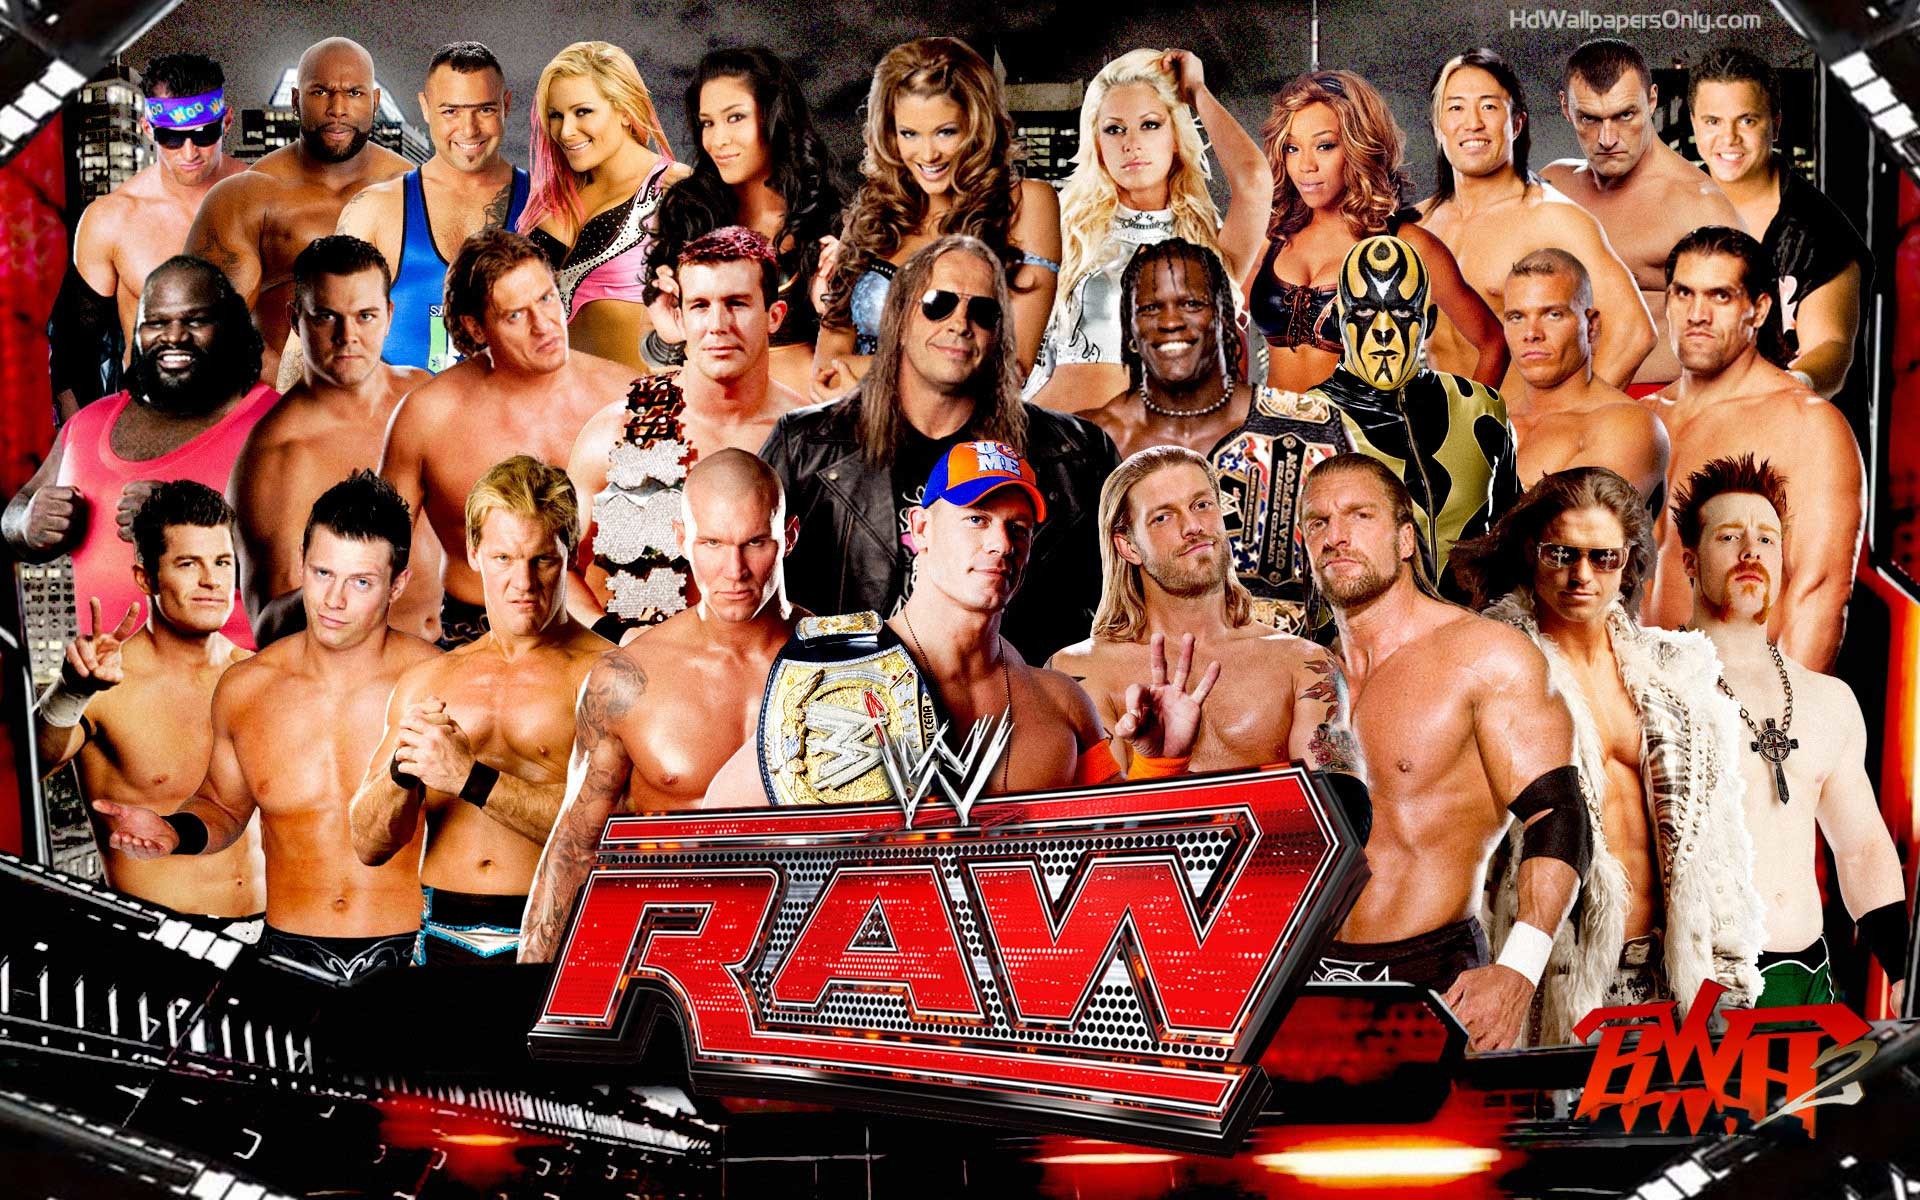 1920x1200 WWE Wallpapers HD Quality HD Wallpapers OnlyHD Wallpapers Only 2